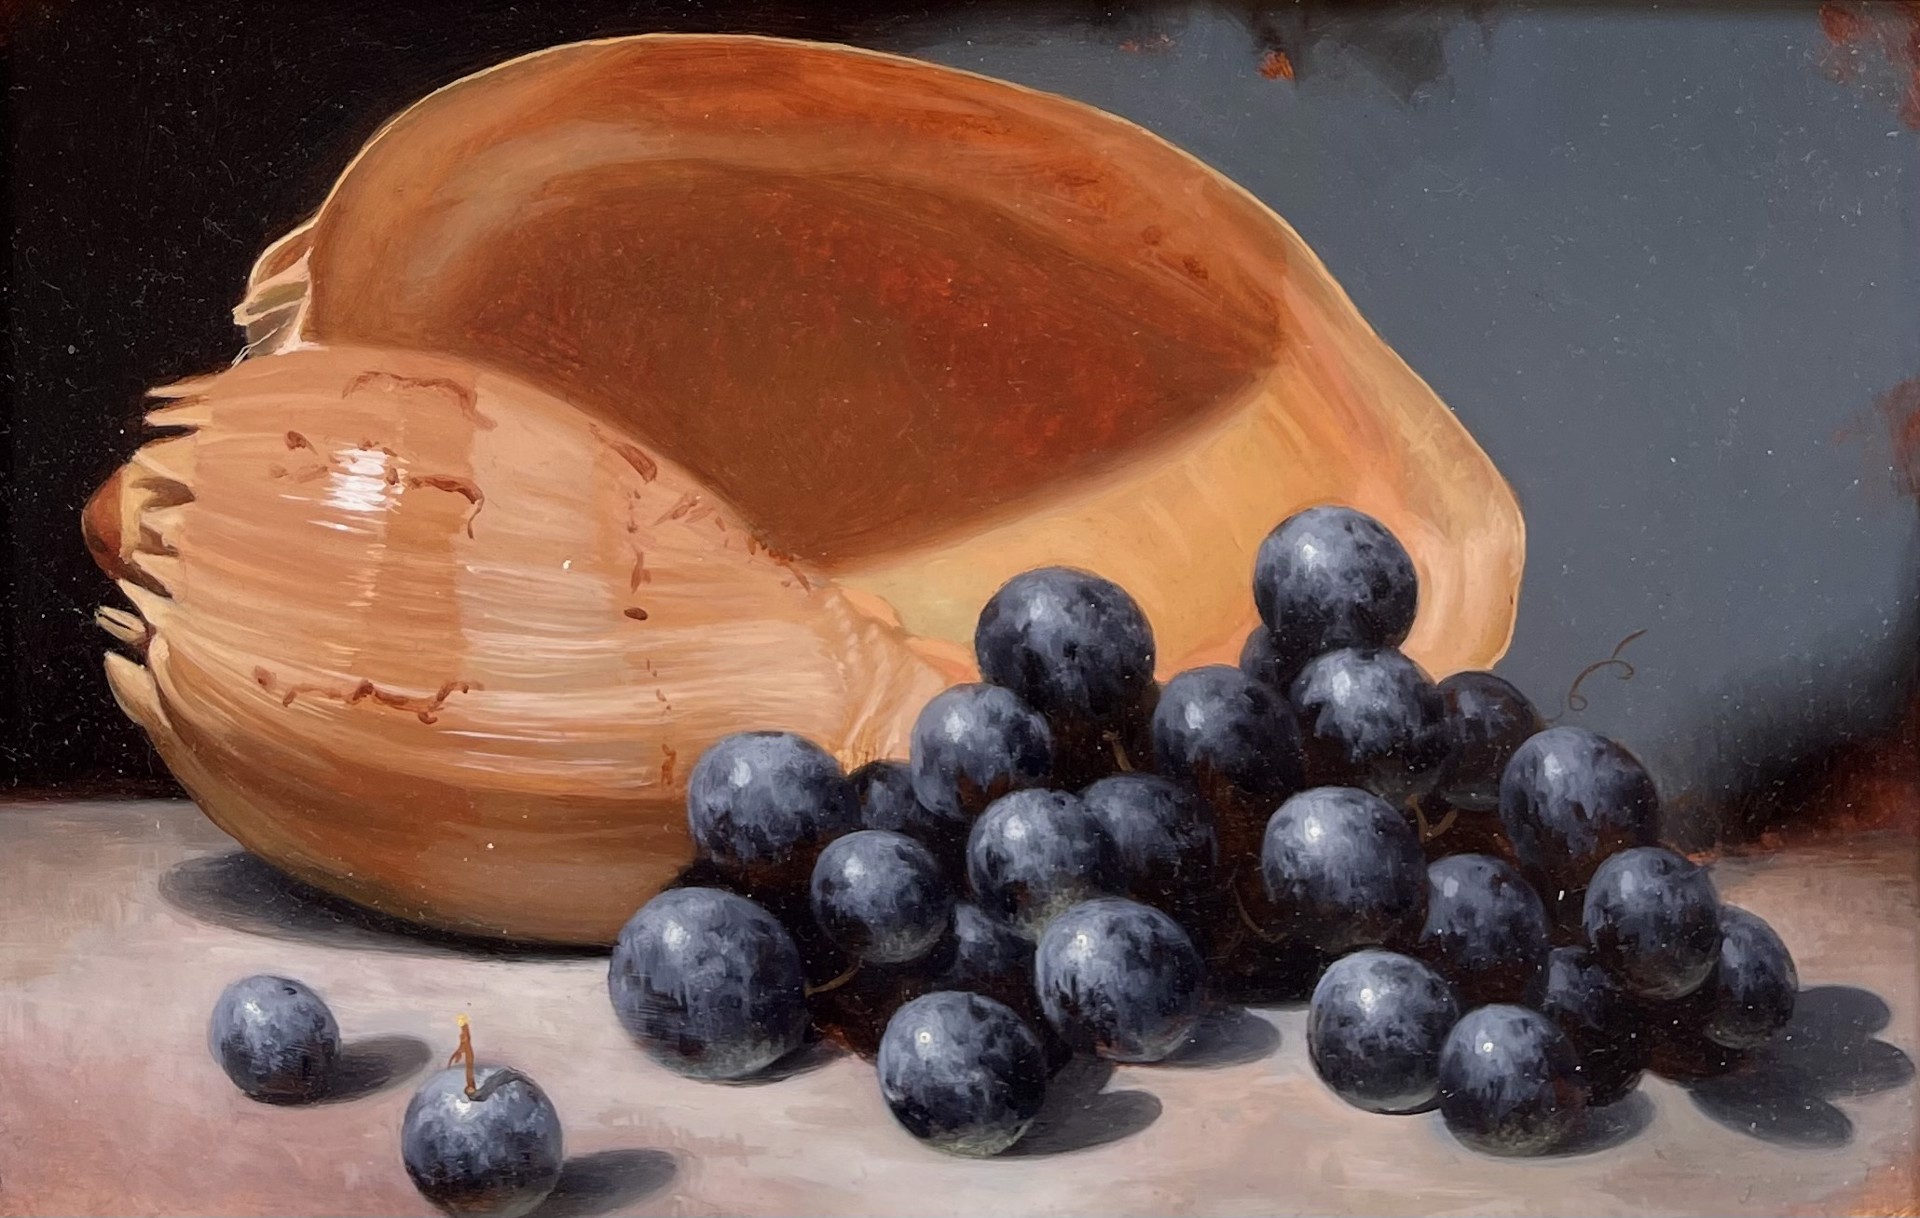 Shell and Grapes by Scott Royston